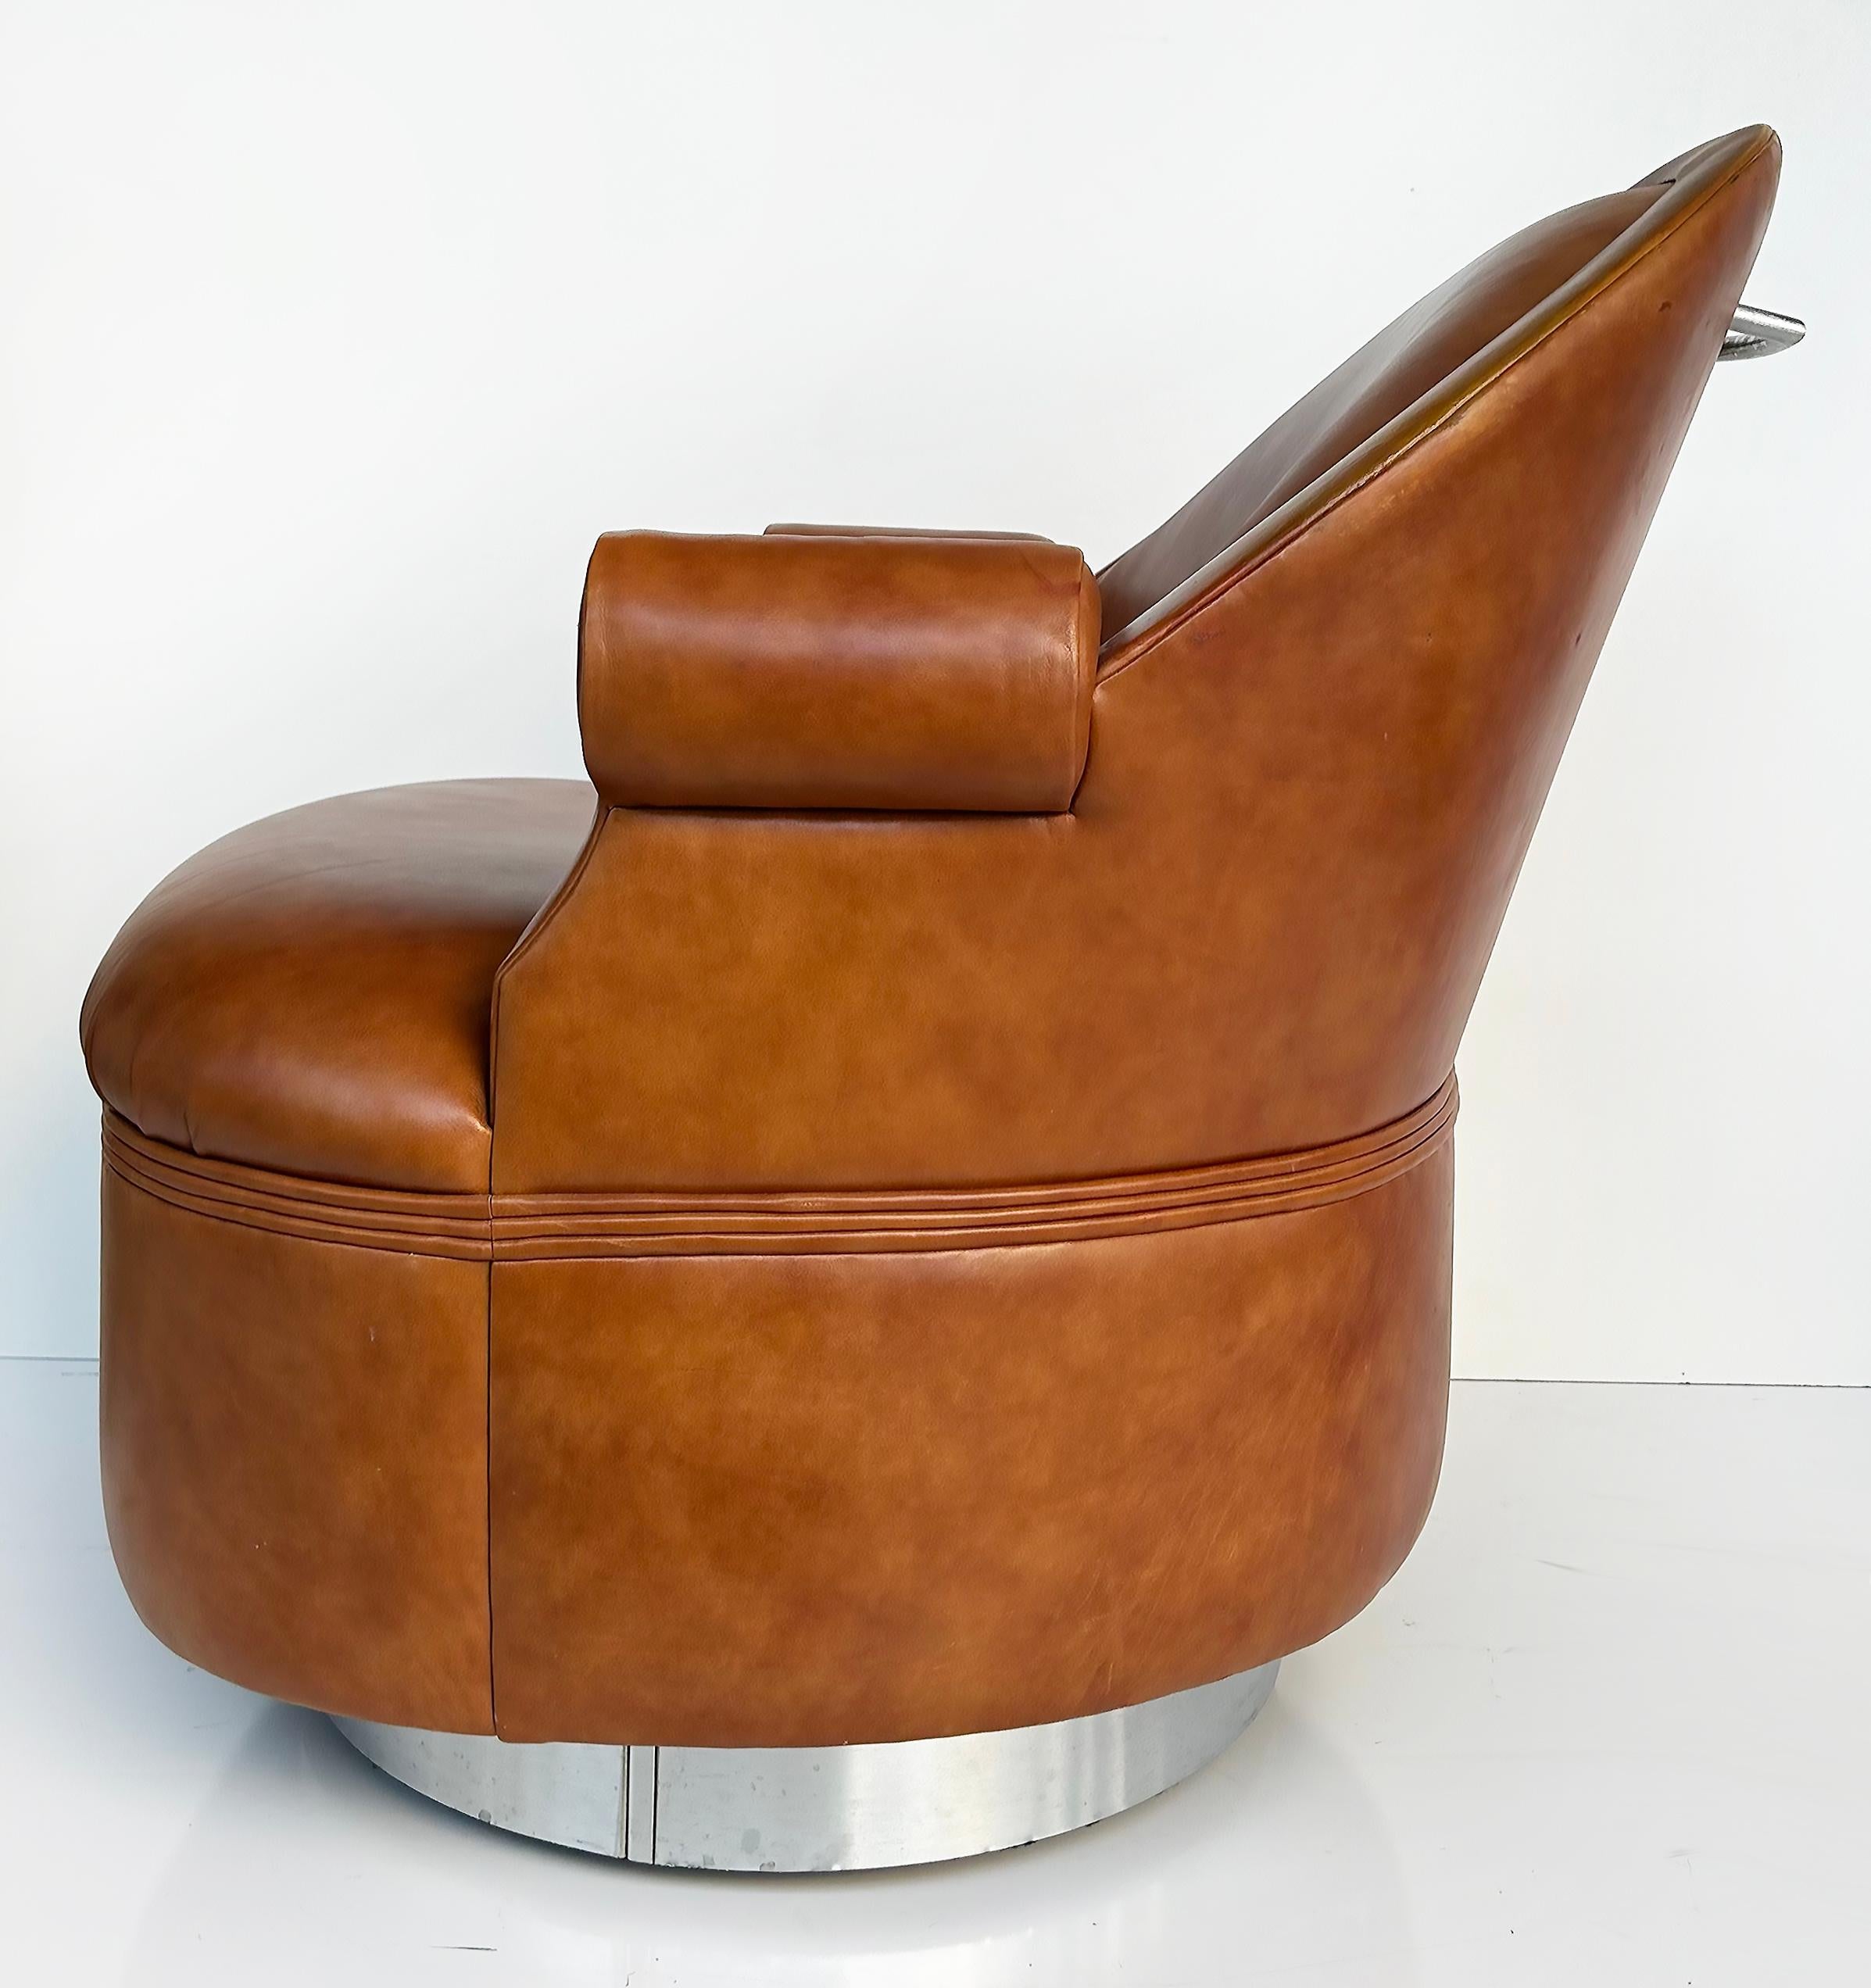  Steve Chase Martin Brattrud Chrome Leather Swivel Chairs on Casters- A Pair For Sale 2